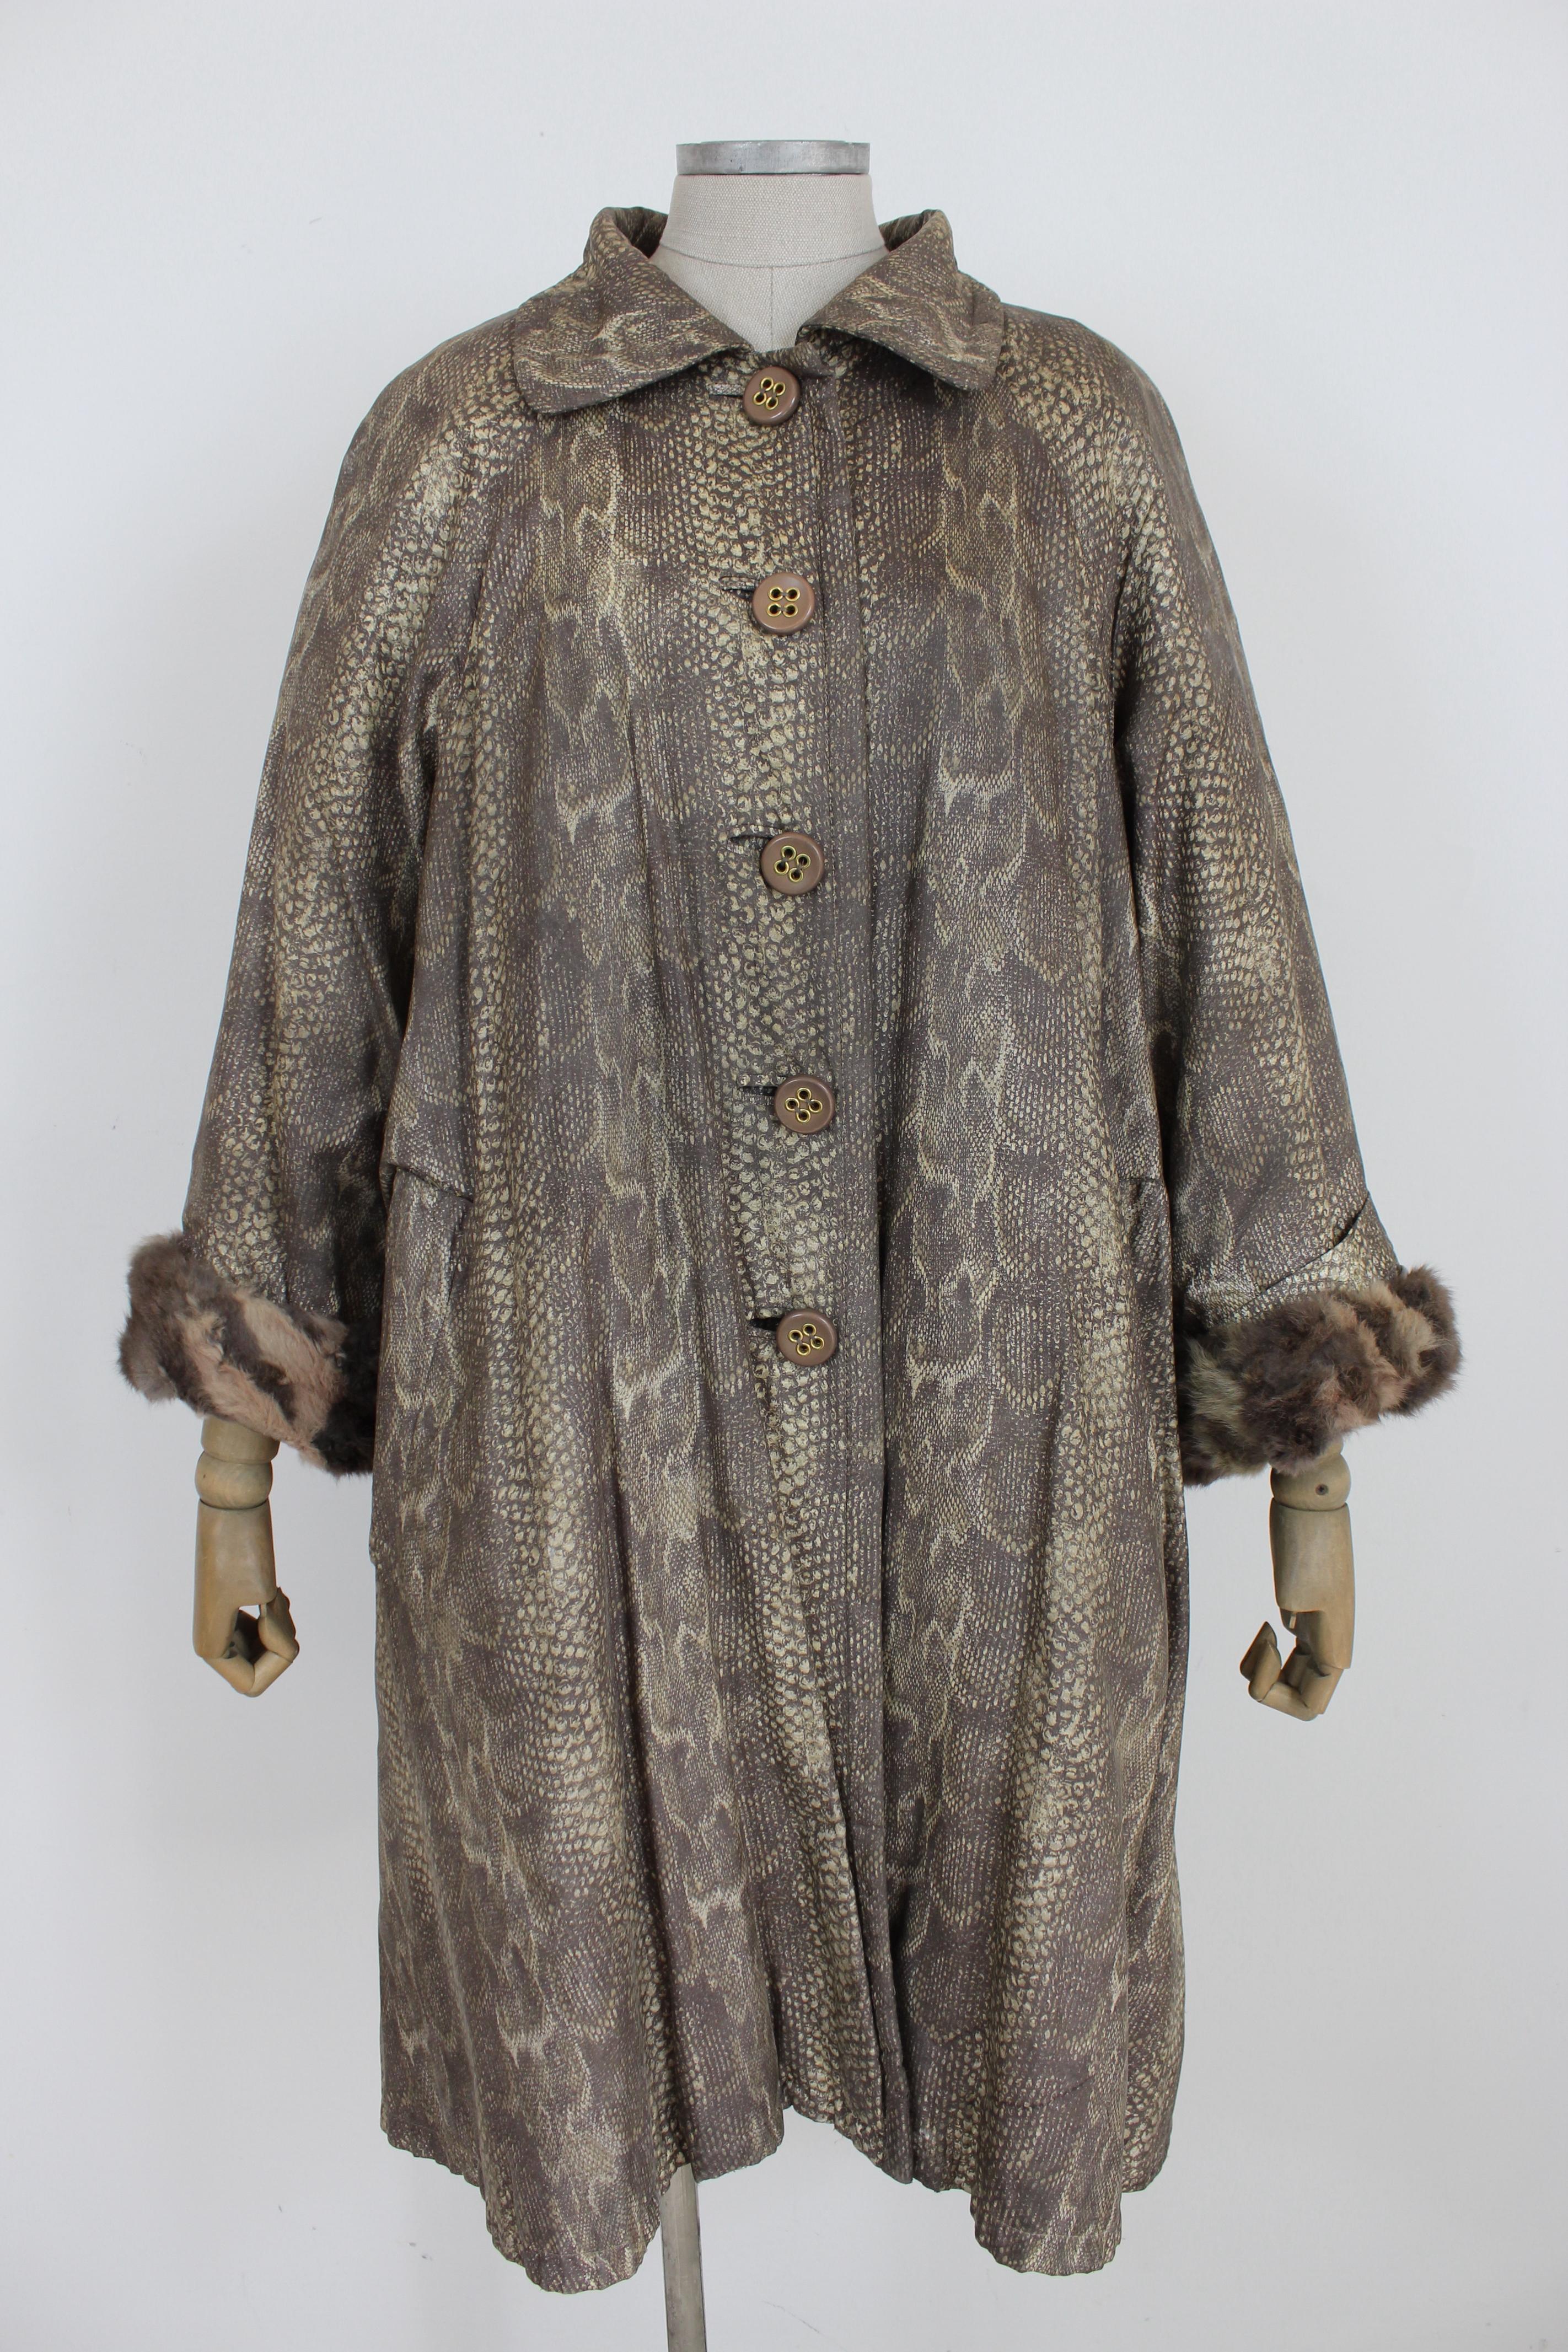 Christian Dior Boutique Fourrure vintage 80s coat with mink fur insert. The coat has the outer part in fabric with crocodile animal print, the inner fur is removable with concealed buttons. So it will be possible to use it for cold or mild